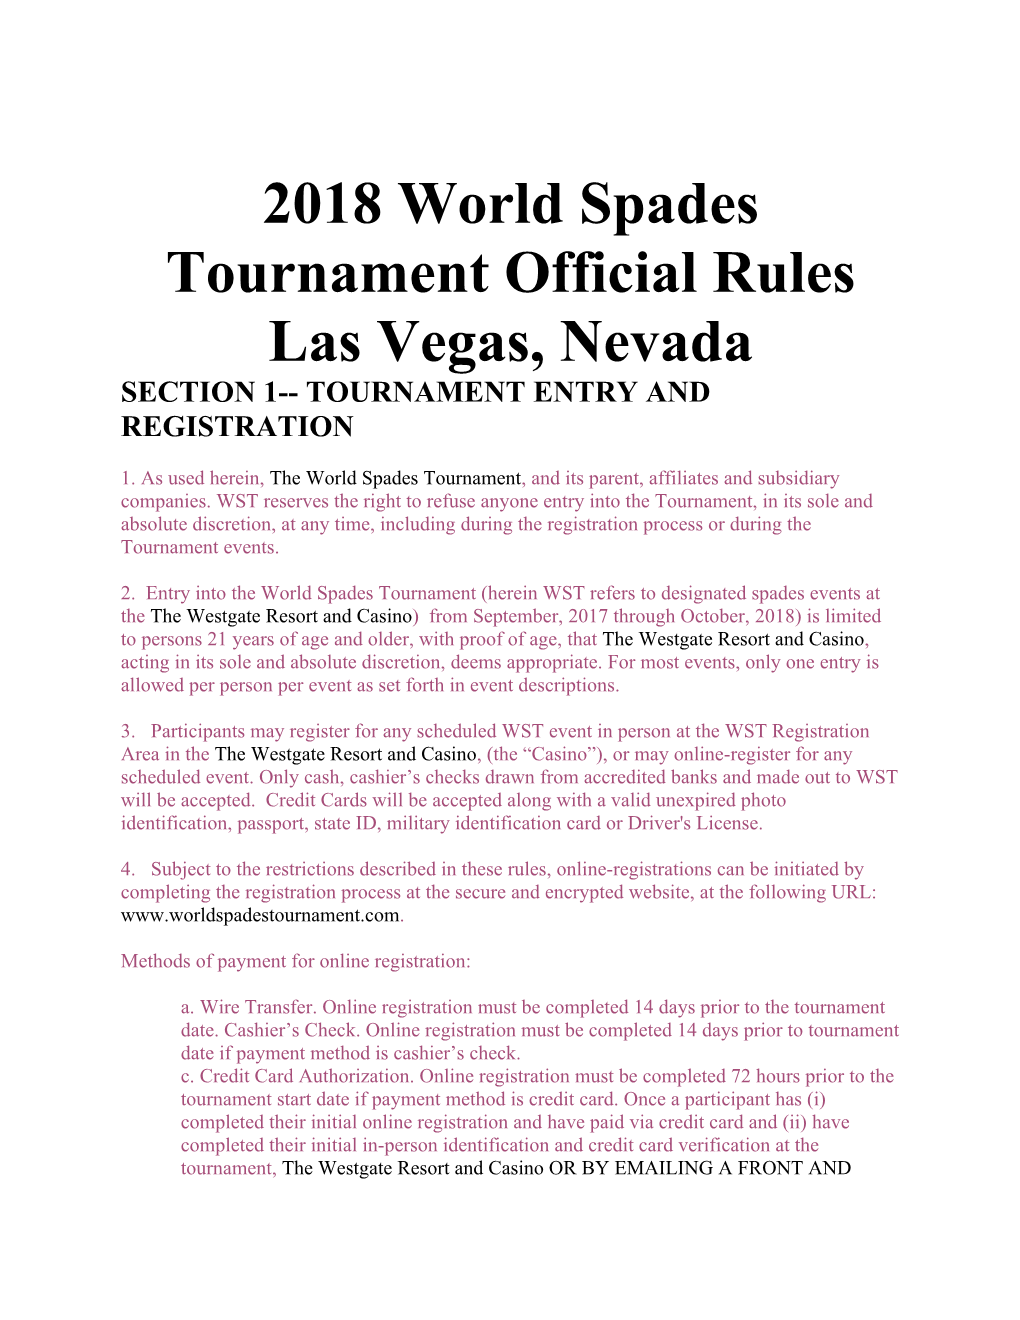 2018 World Spades Tournament Official Rules